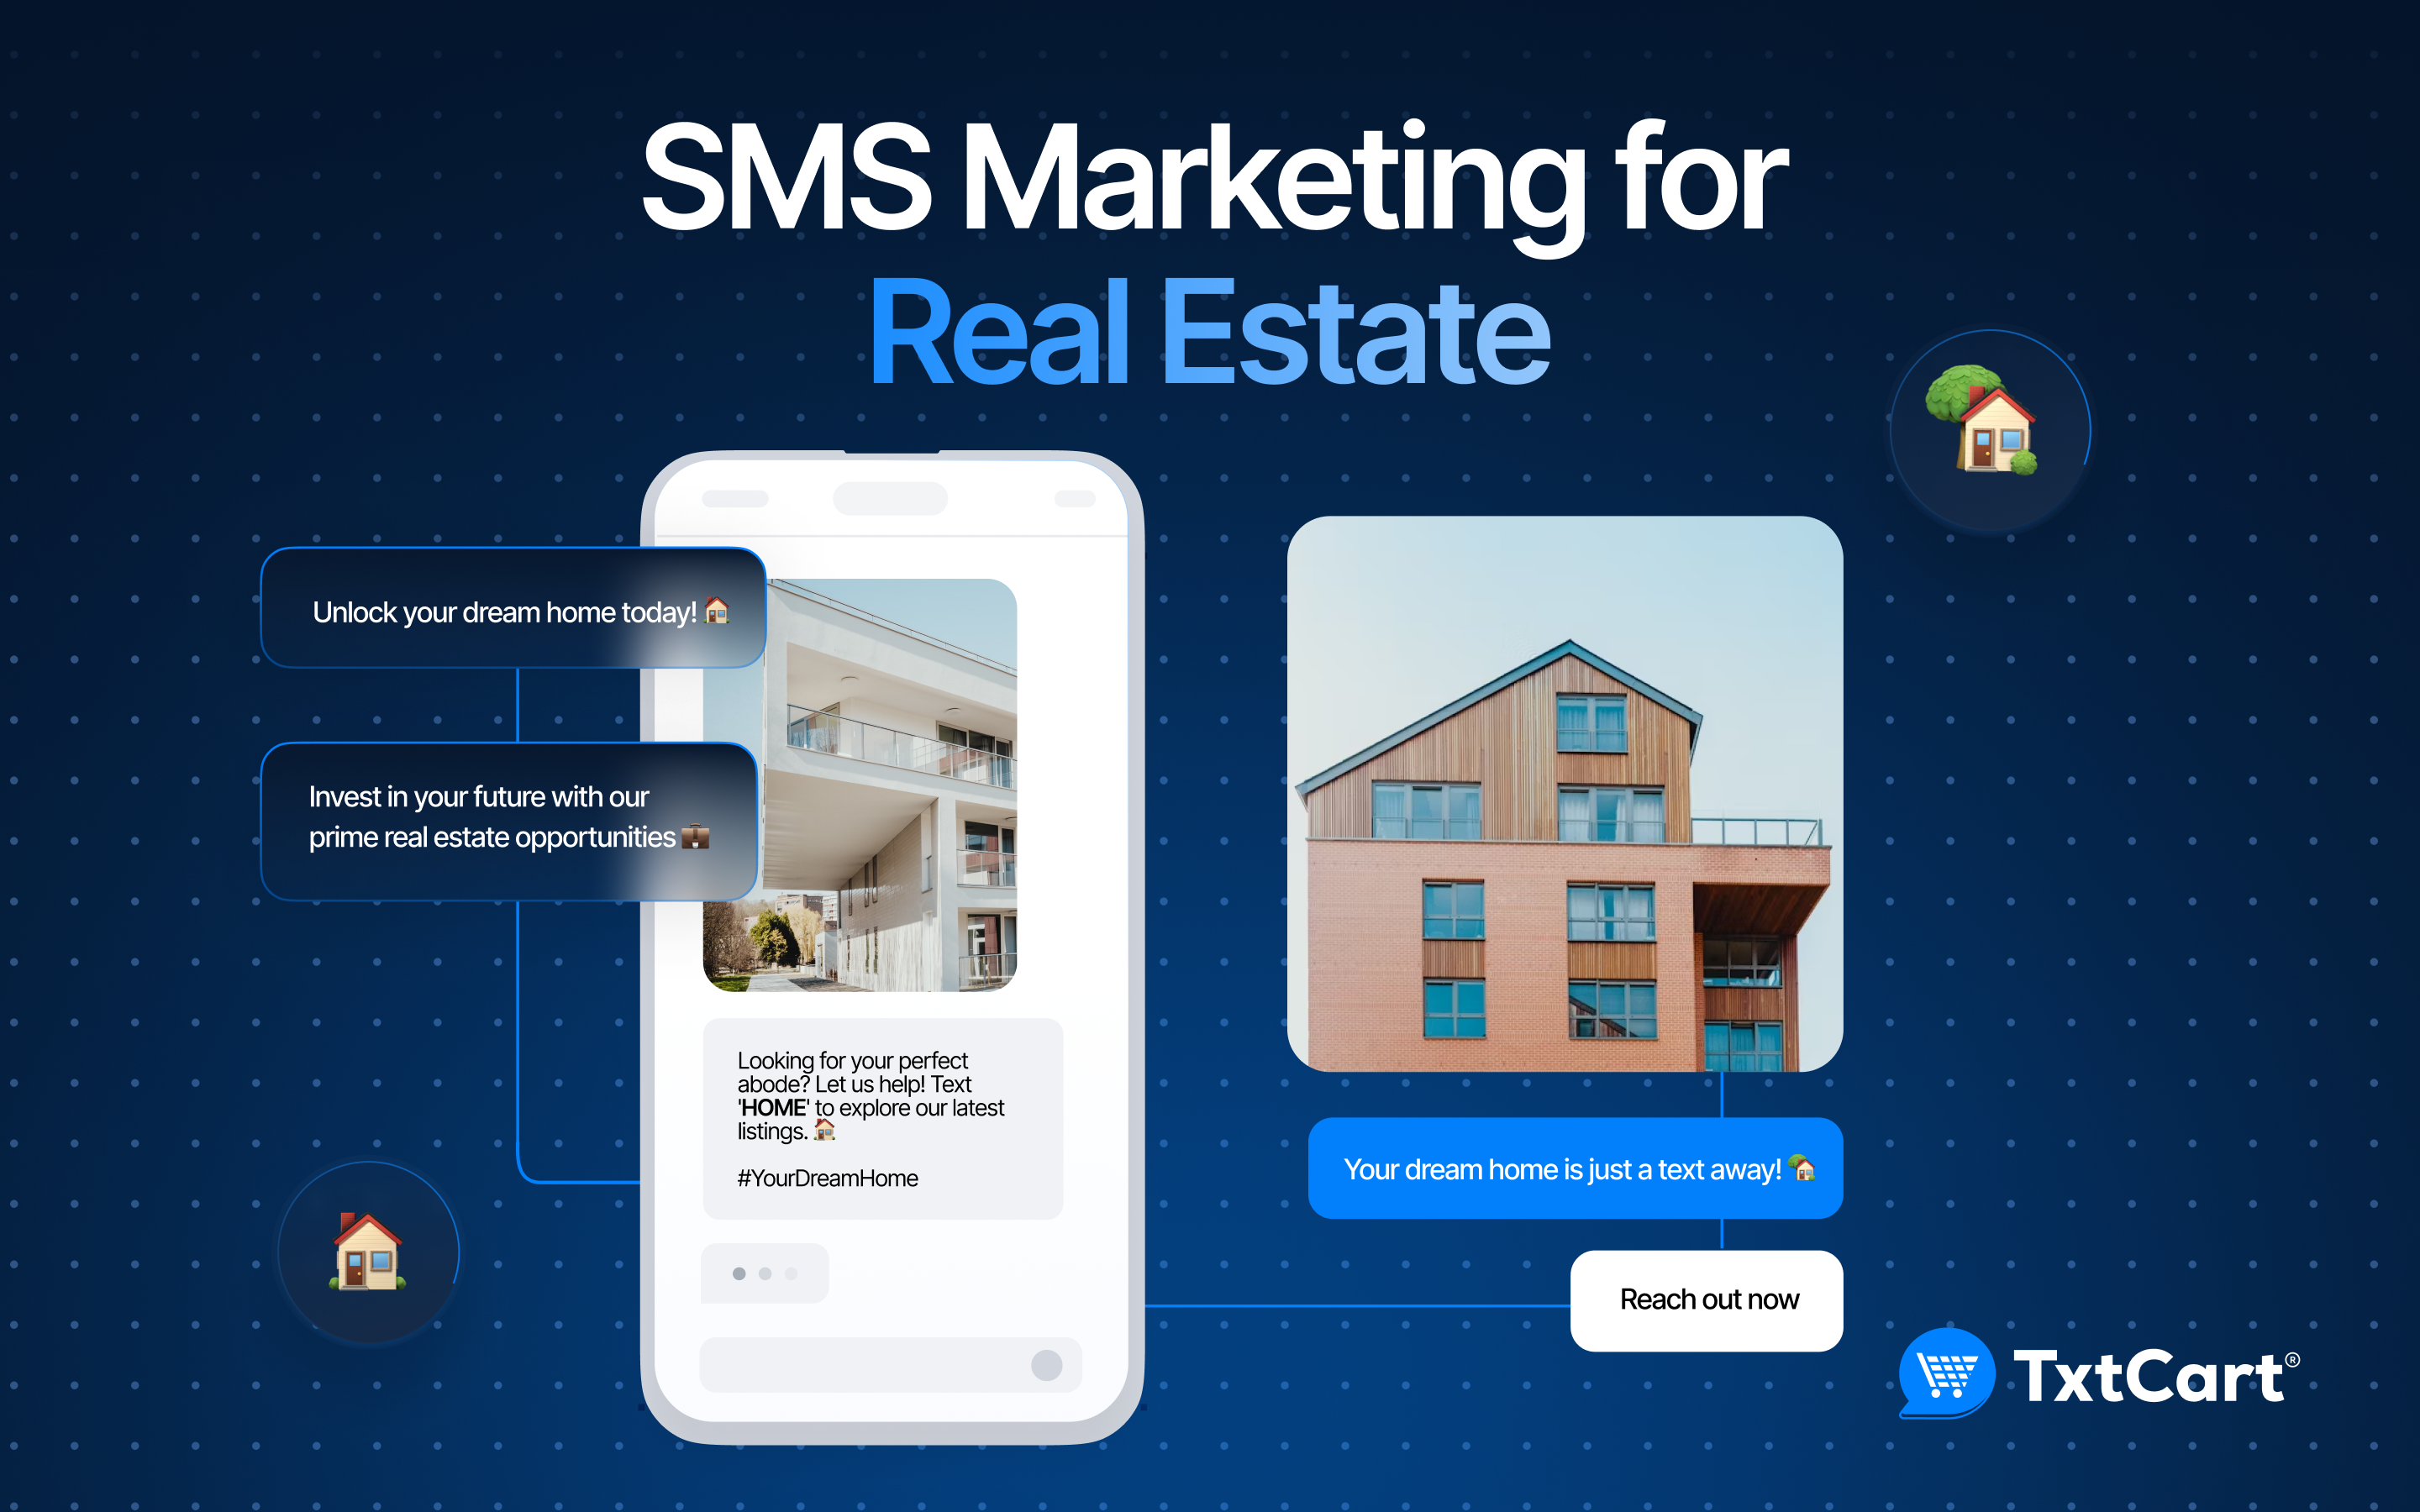 SMS Marketing for Real Estate